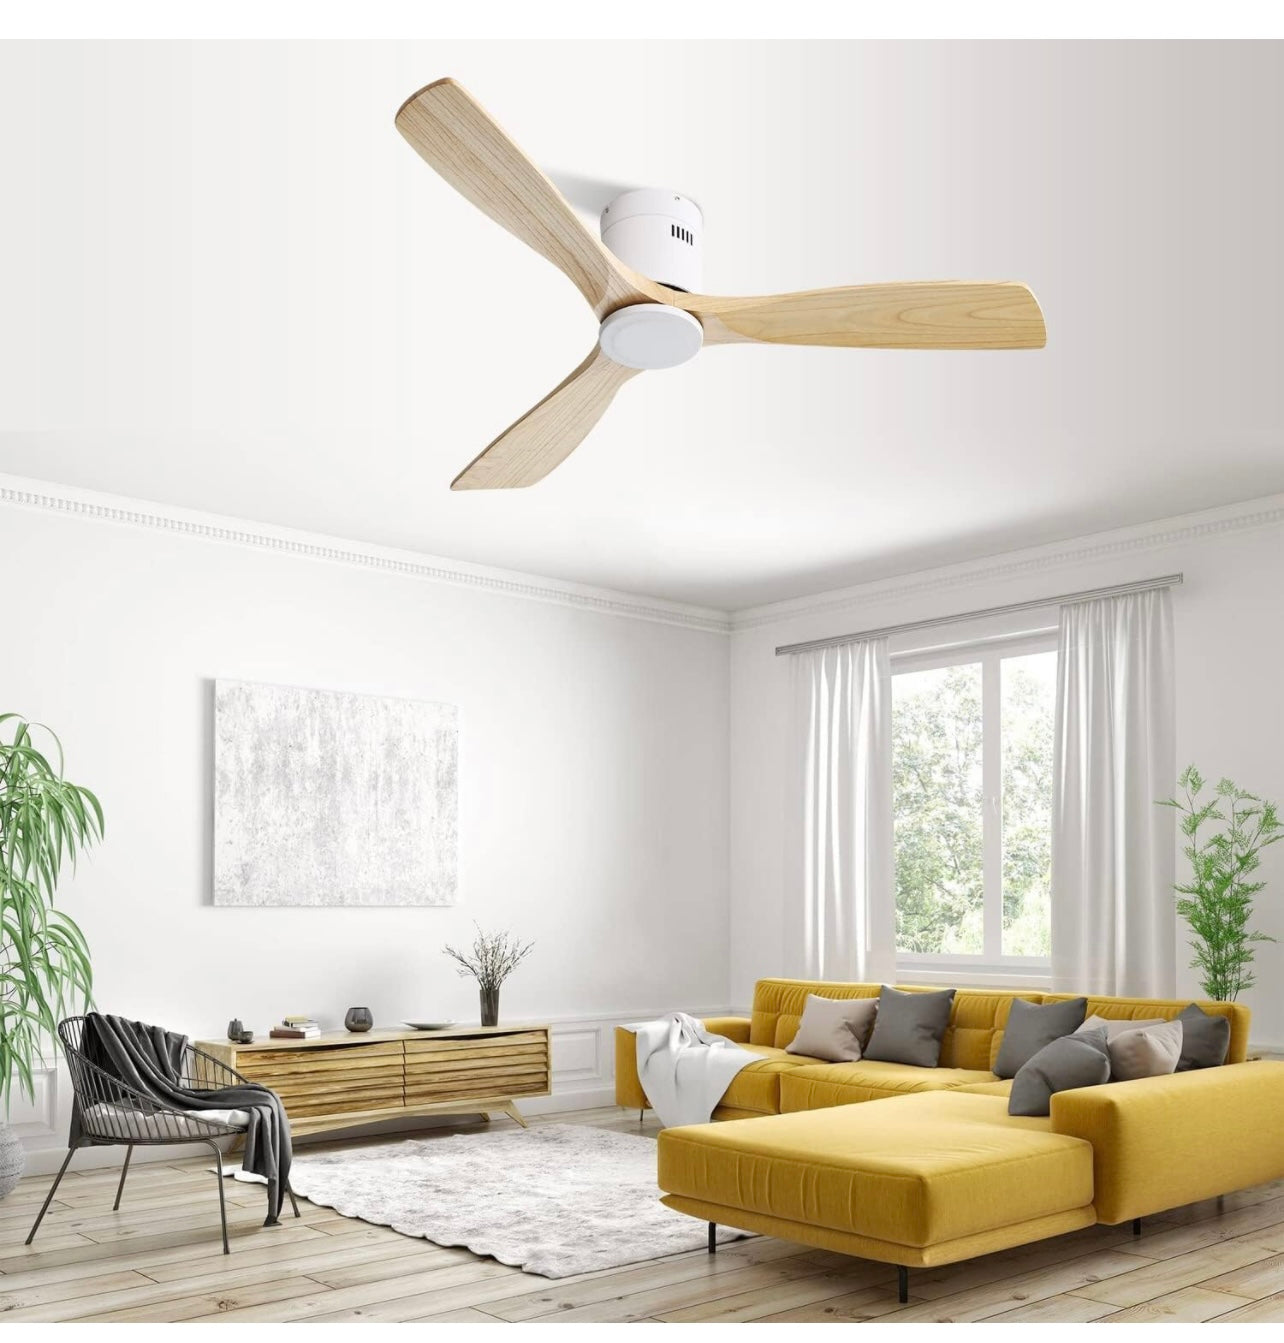 CACI Mall 52 Inch Low Profile Ceiling Fan No Light Wood Fan Blades Flush Mount Ceiling Fan Noiseless Reversible DC Motor Remote Control Without Light (White)